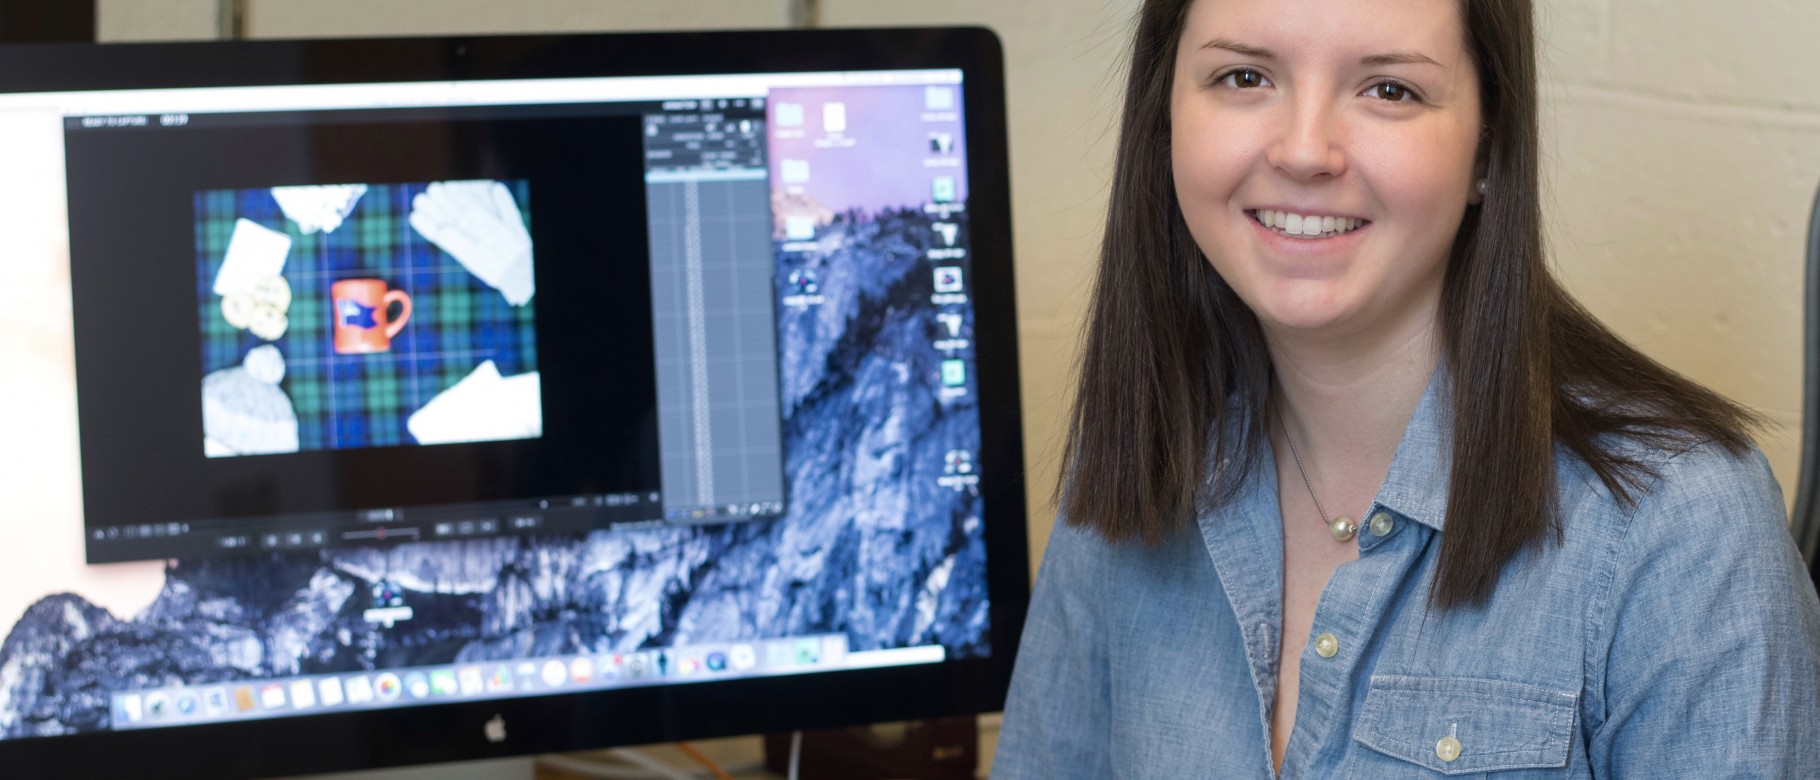 Communications student finds new career options through stop animation videos